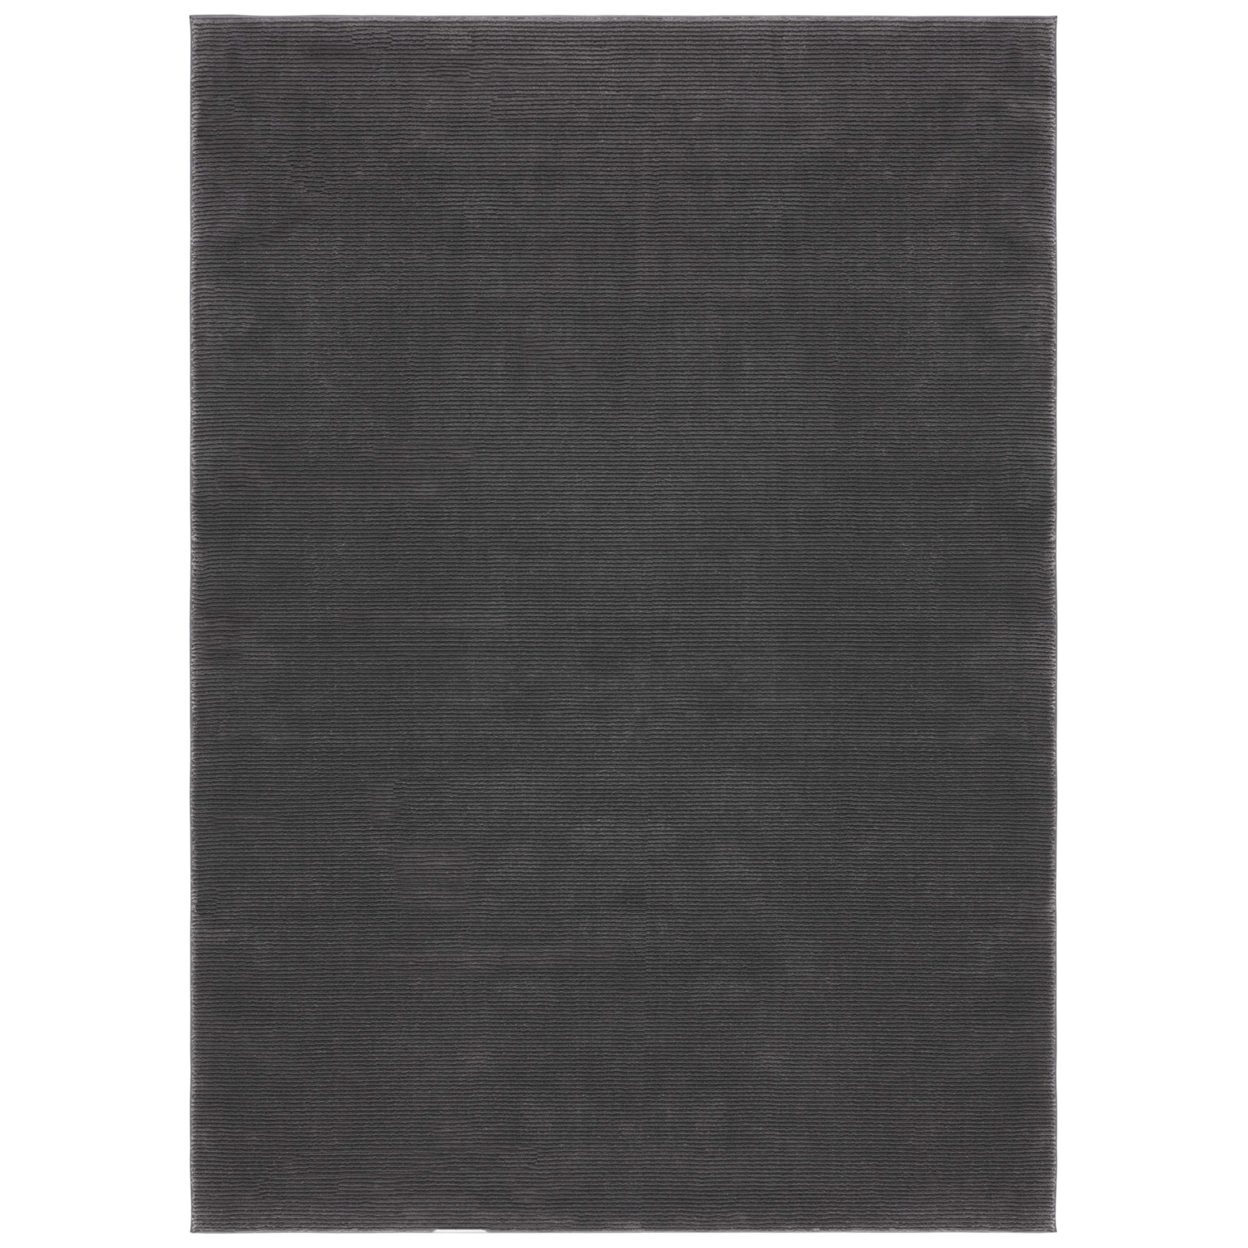 SAFAVIEH REV102H Revive Charcoal - Taupe, 2'-7 X 5' Rectangle